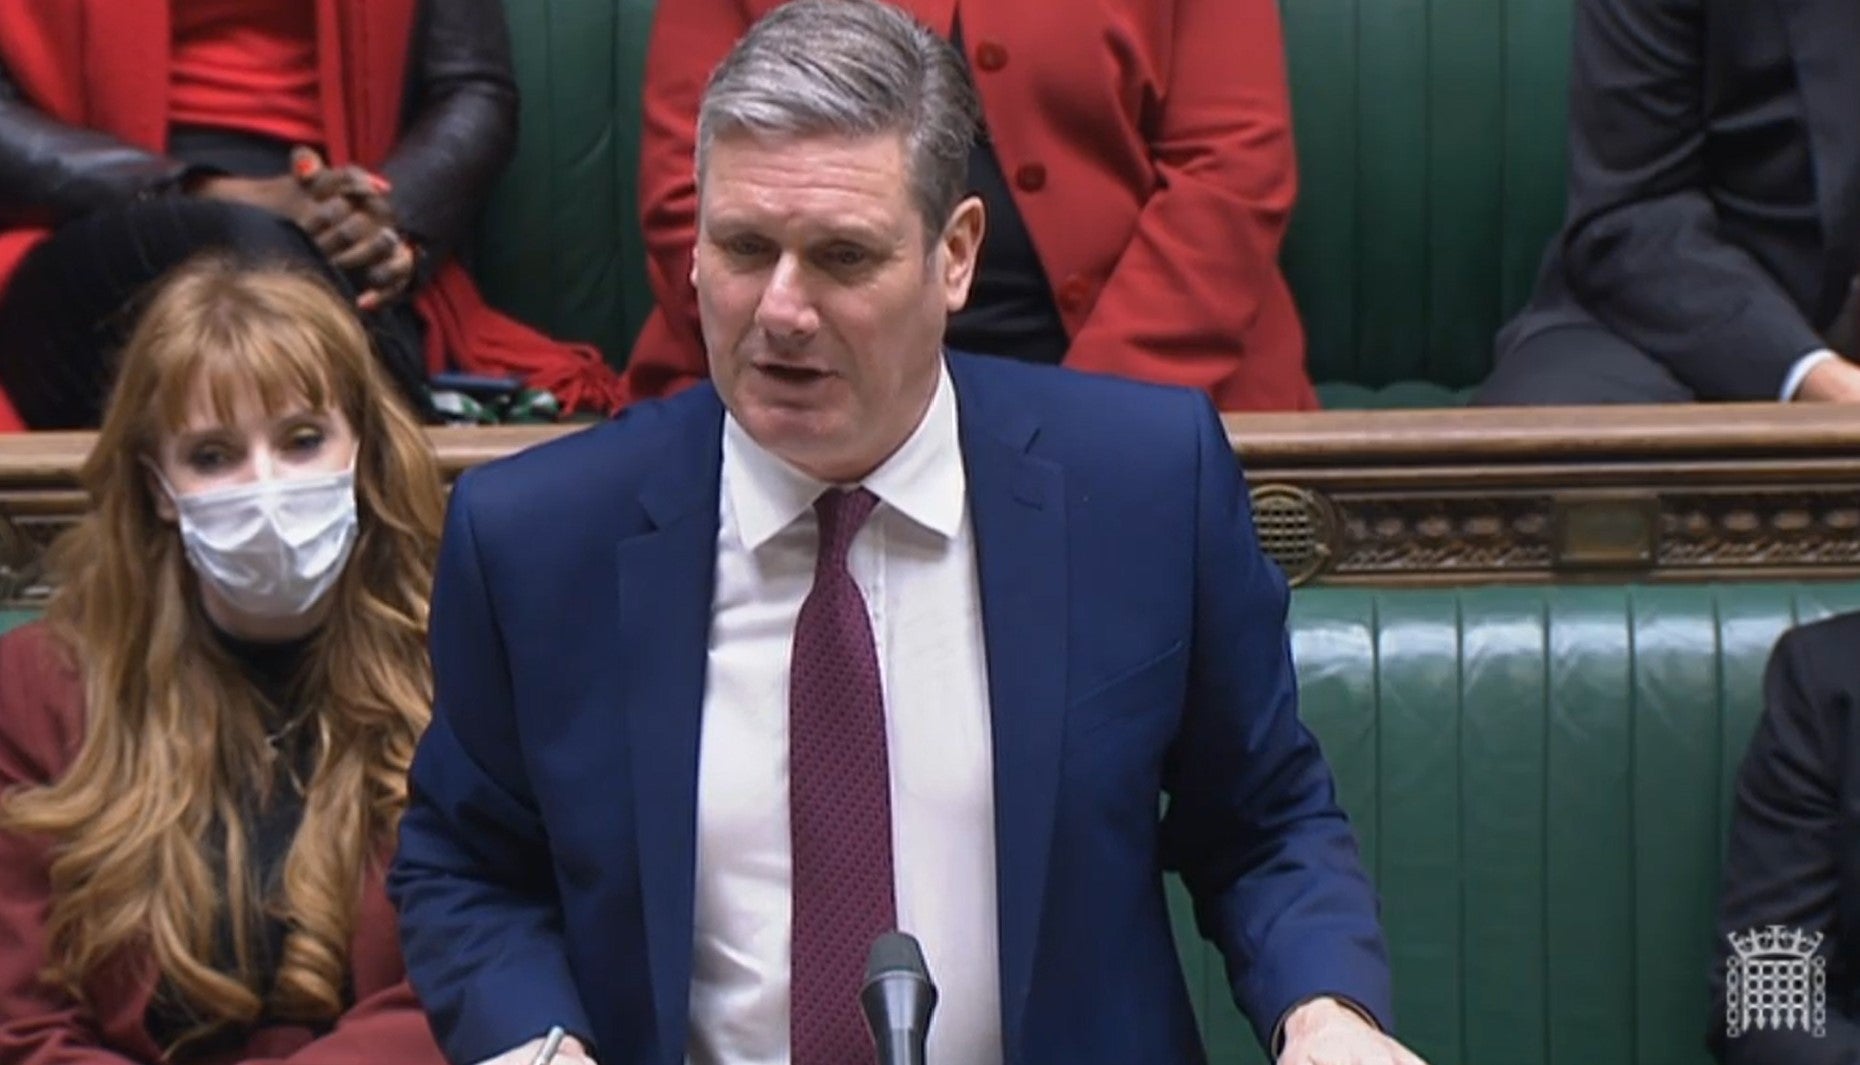 Keir Starmer: ‘The Labour Party showed the leadership that the PM can’t’